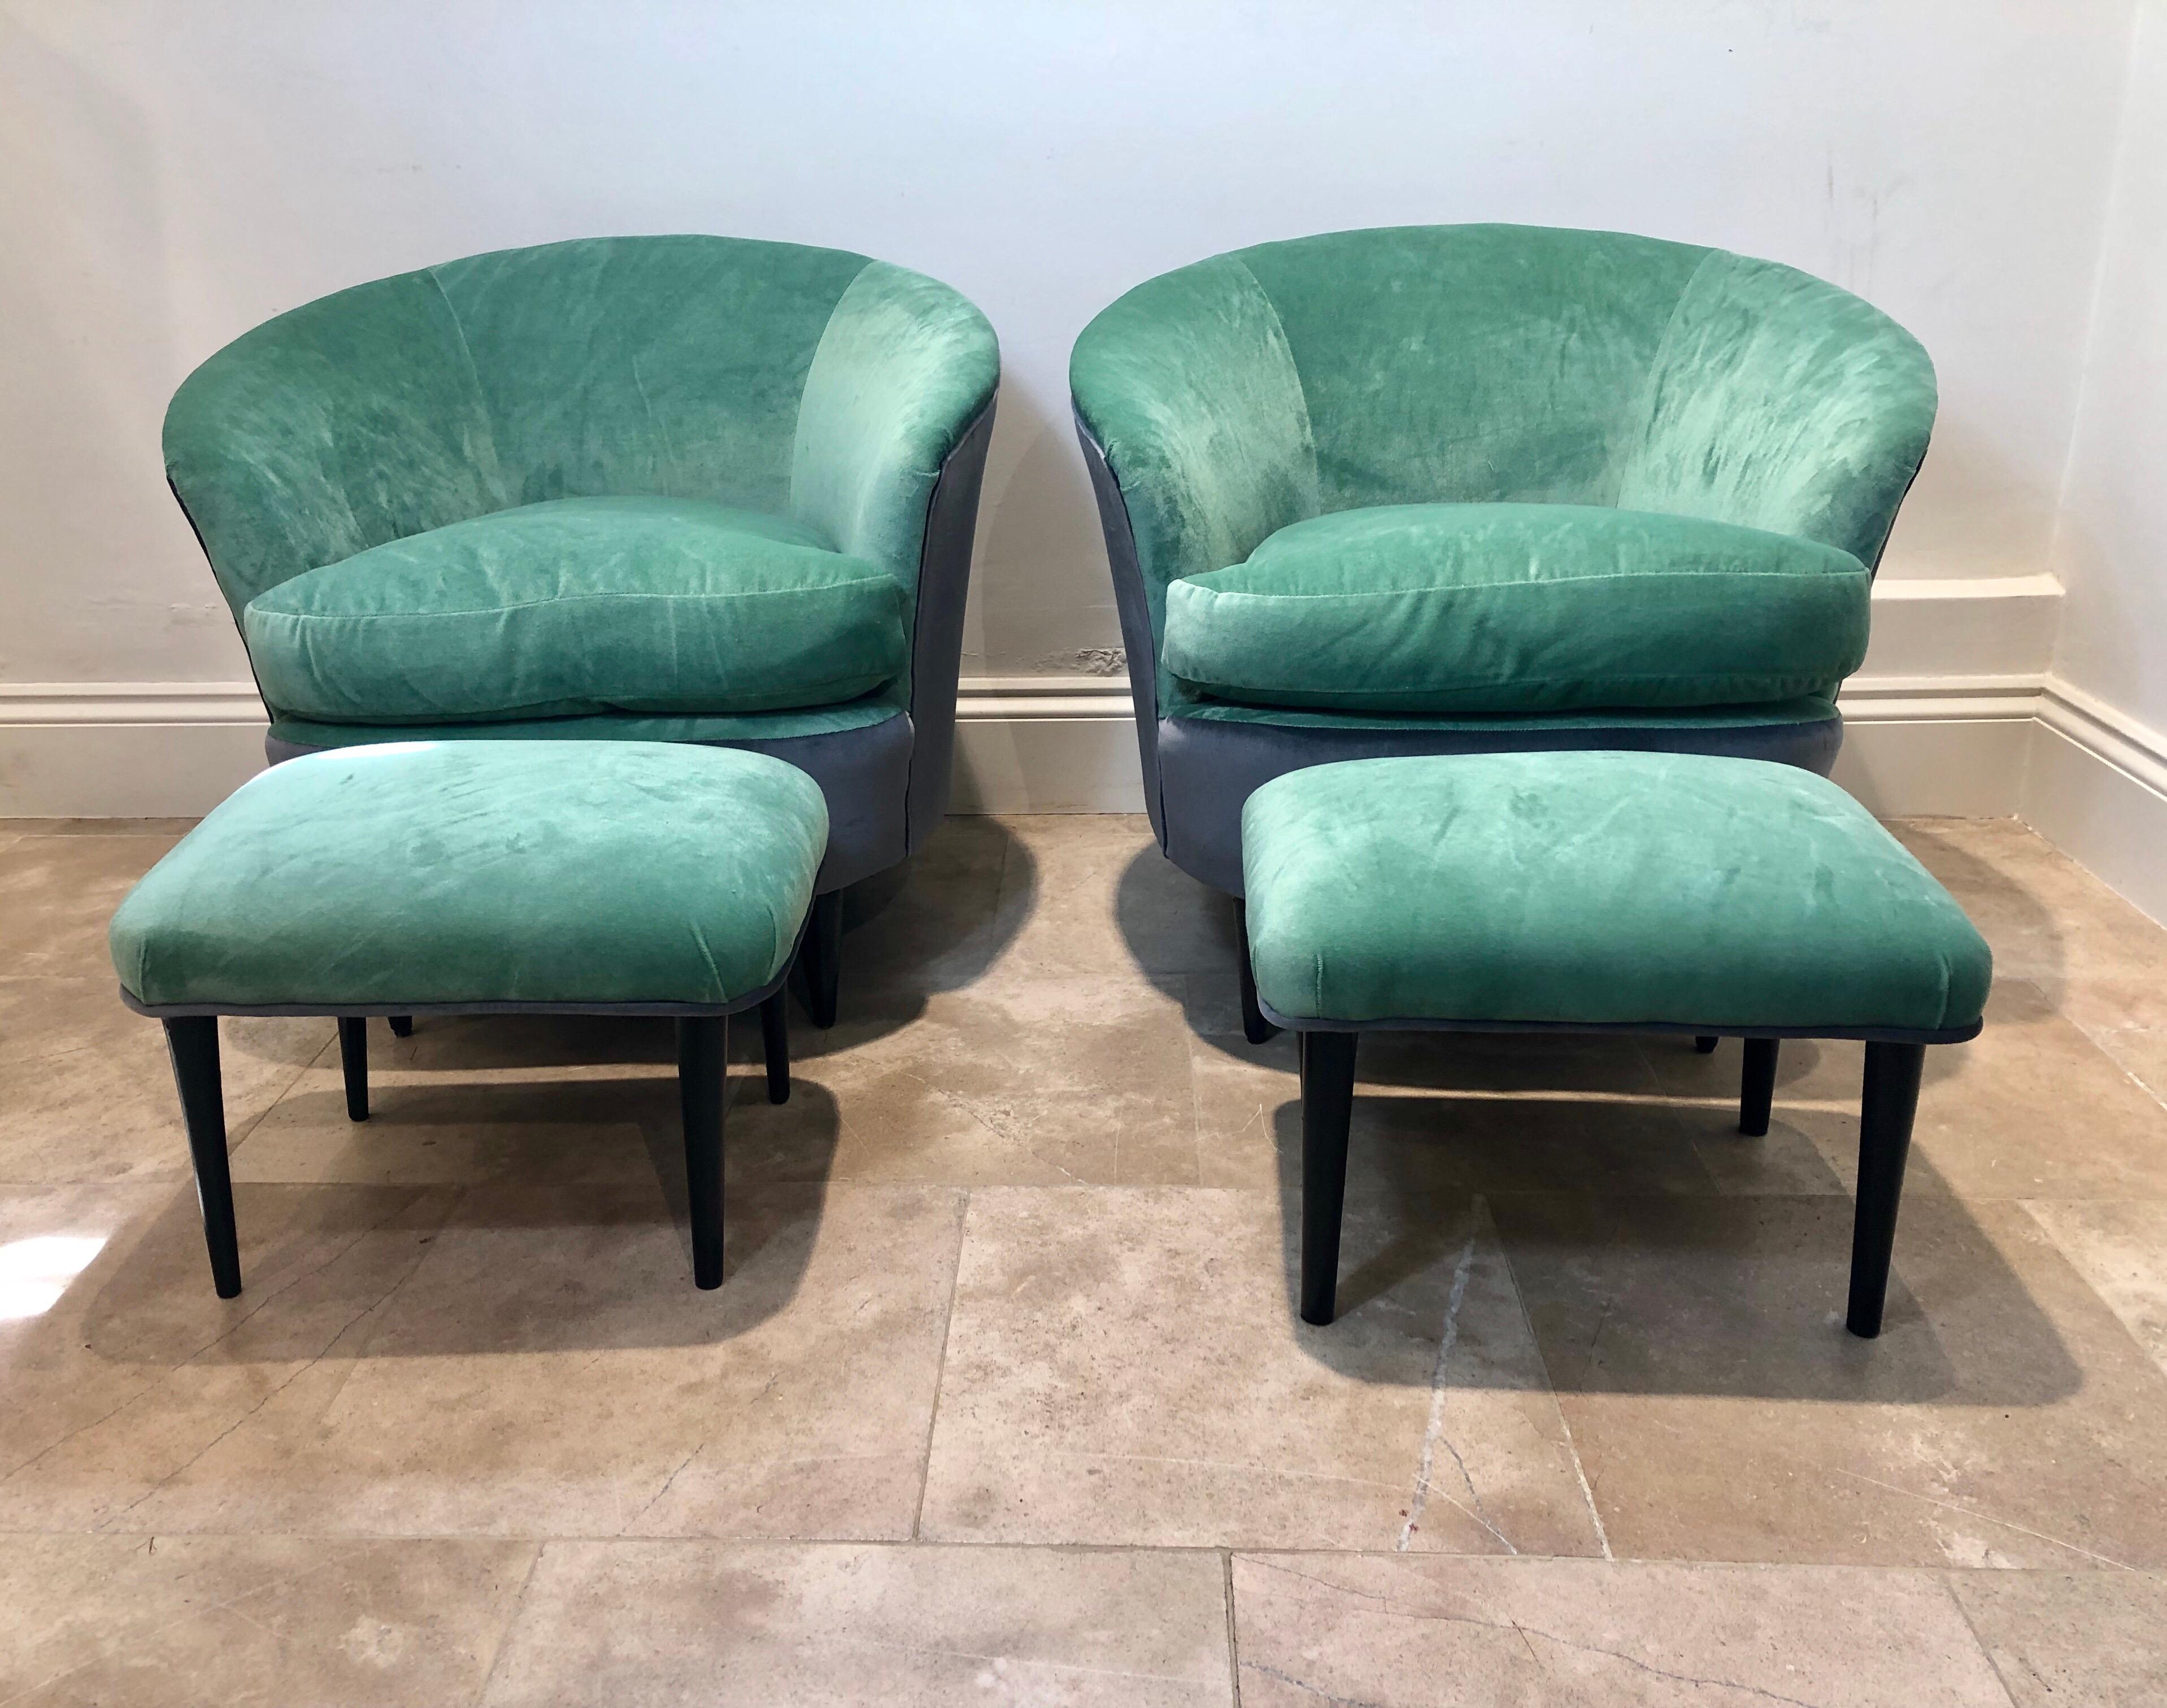 Pair of Italian Curved Chairs and Stools with Mint Green and Grey Upholstery For Sale 6